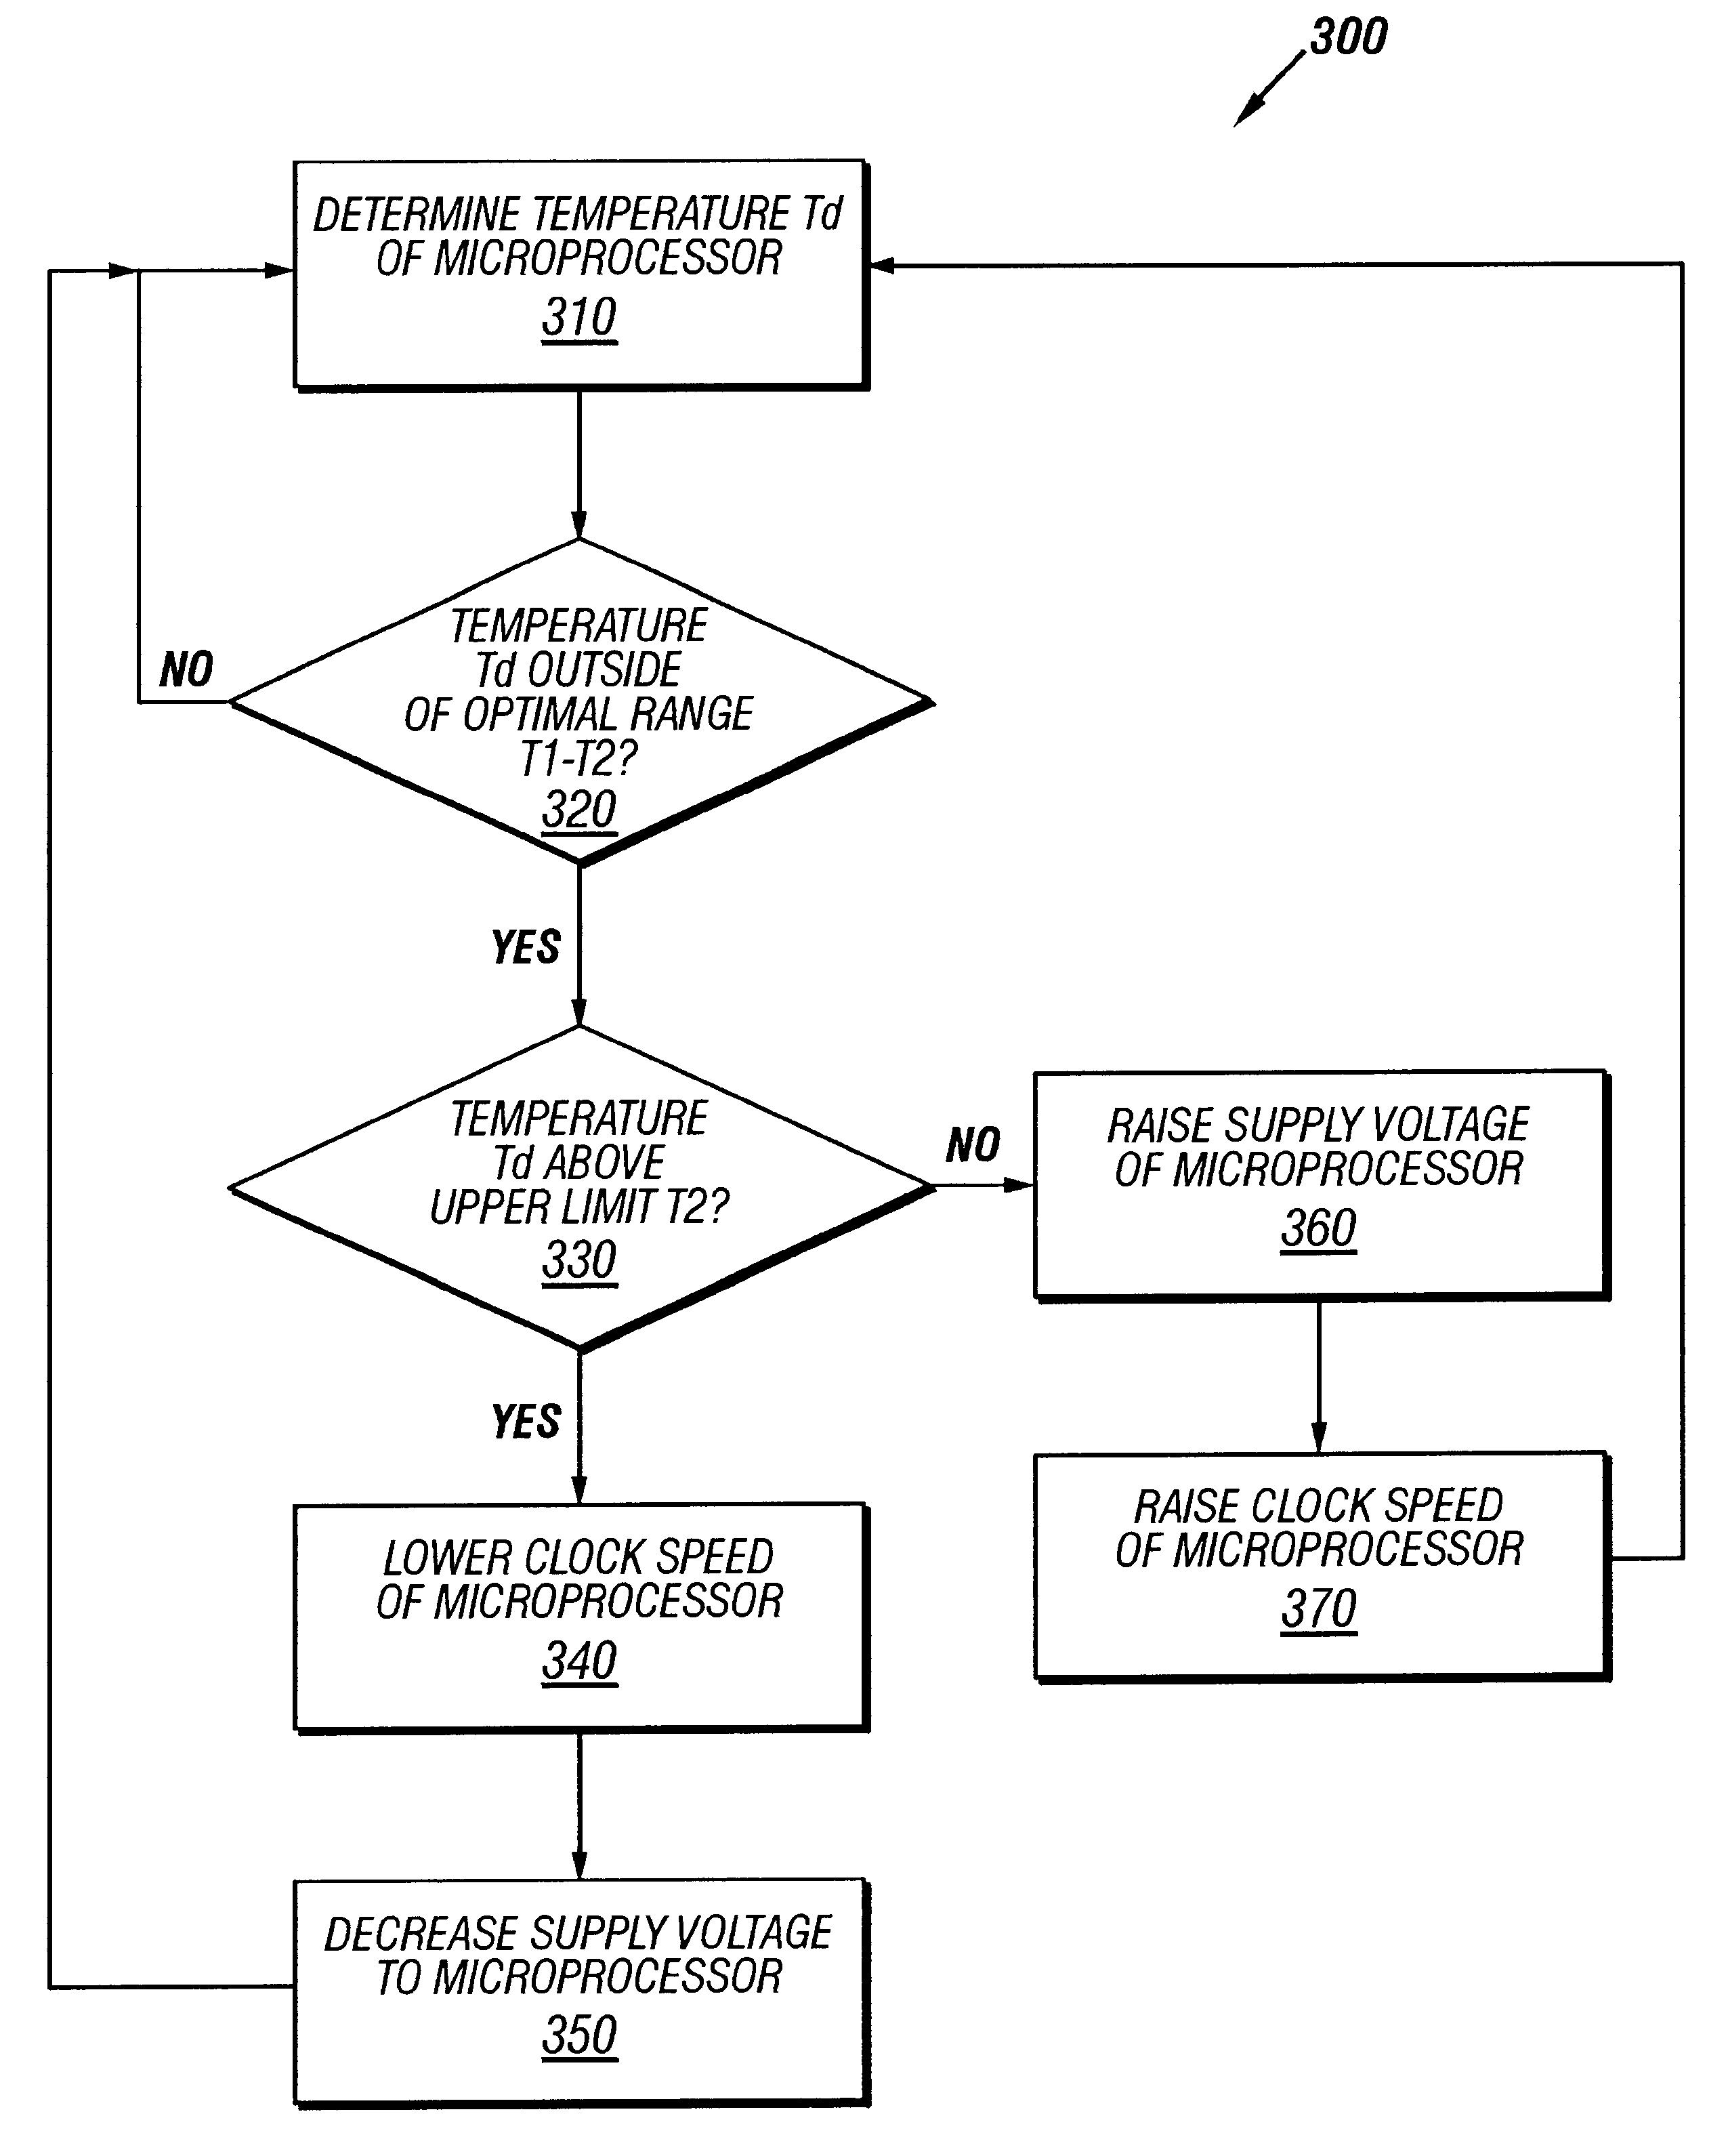 Method and apparatus for power throttling in a microprocessor using a closed loop feedback system